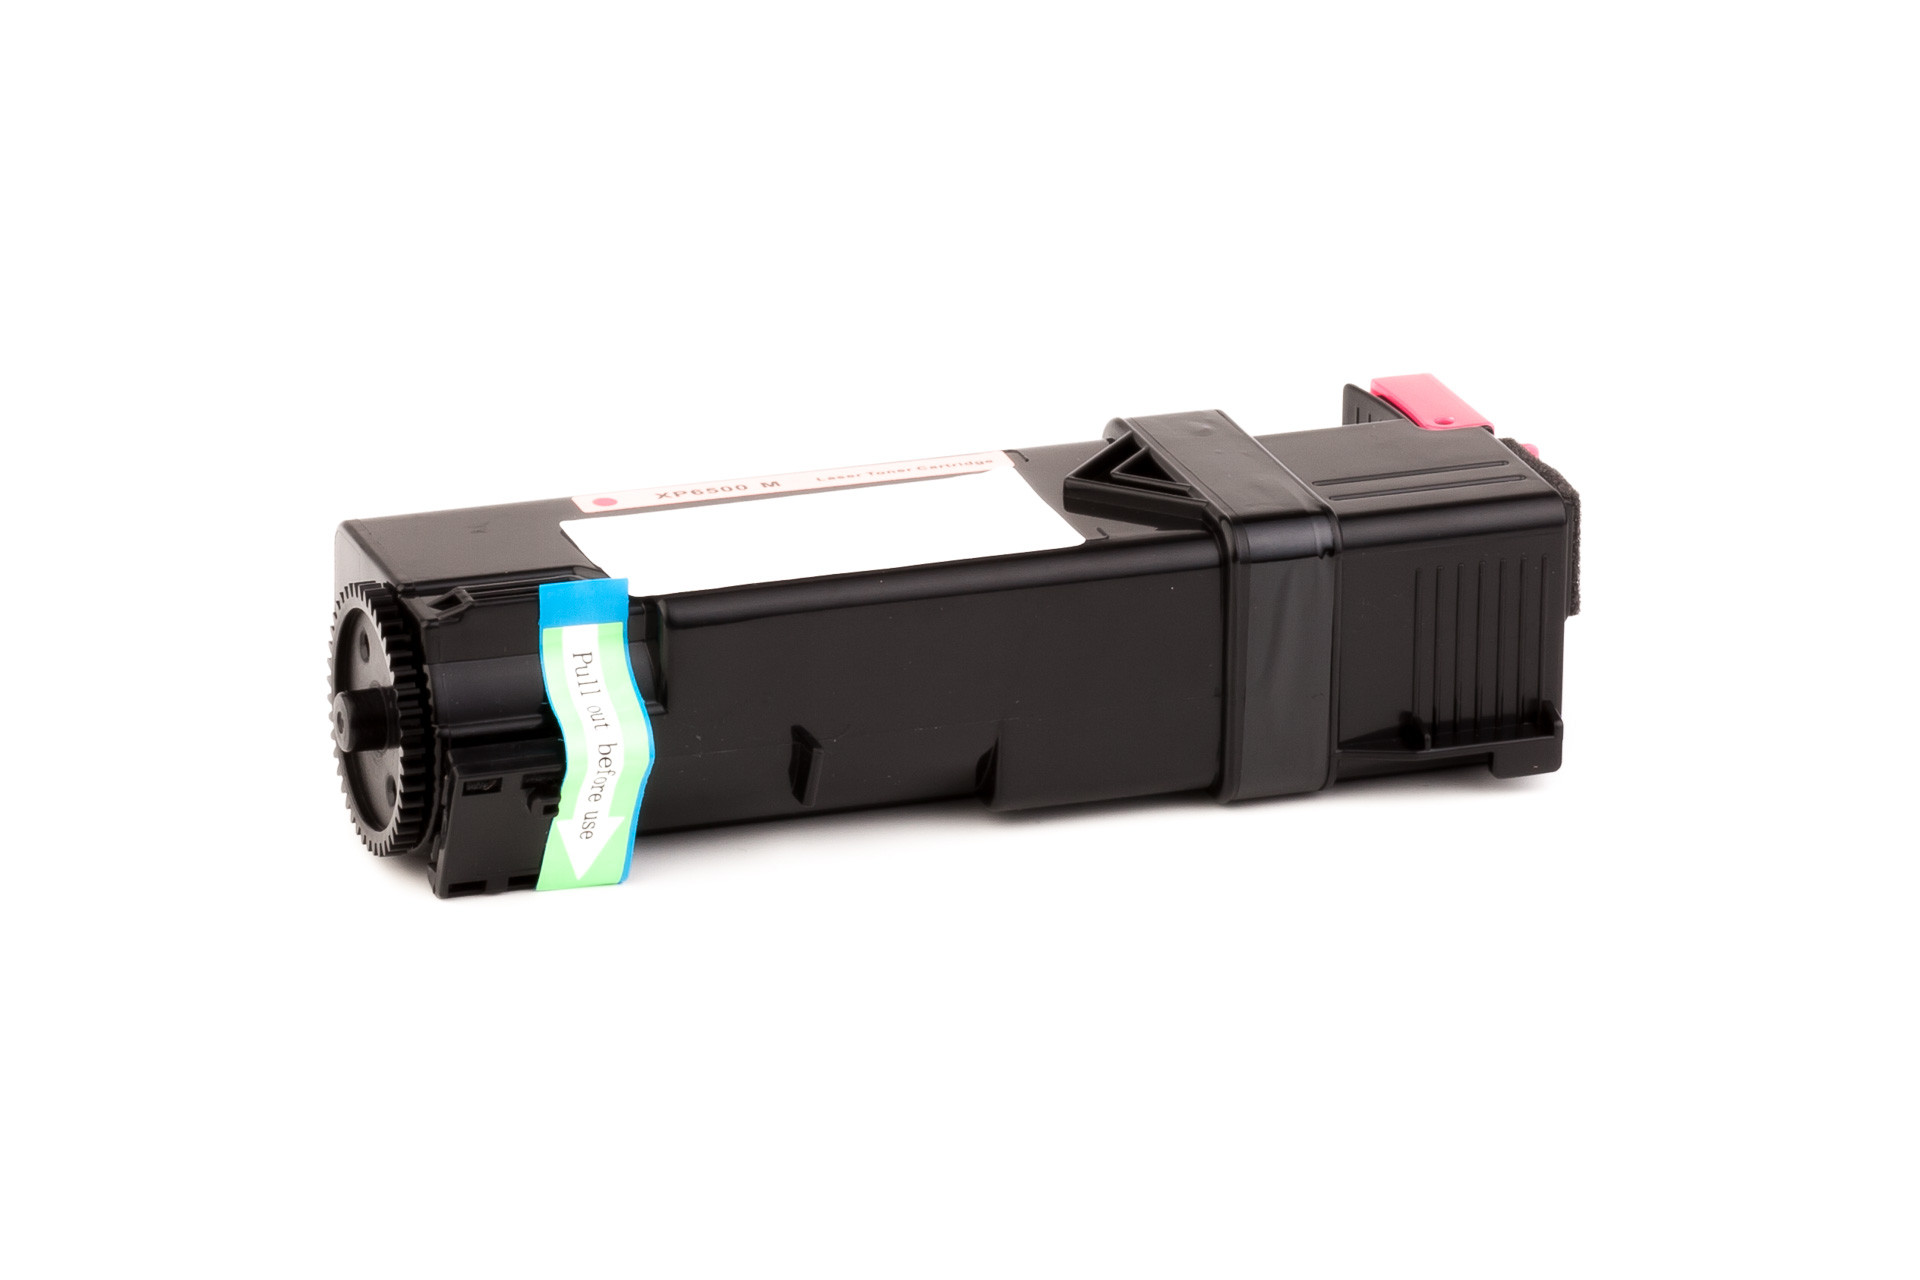 Toner cartridge (alternative) compatible with Xerox 106R01595/106 R 01595 - Phaser 6500 DN magenta